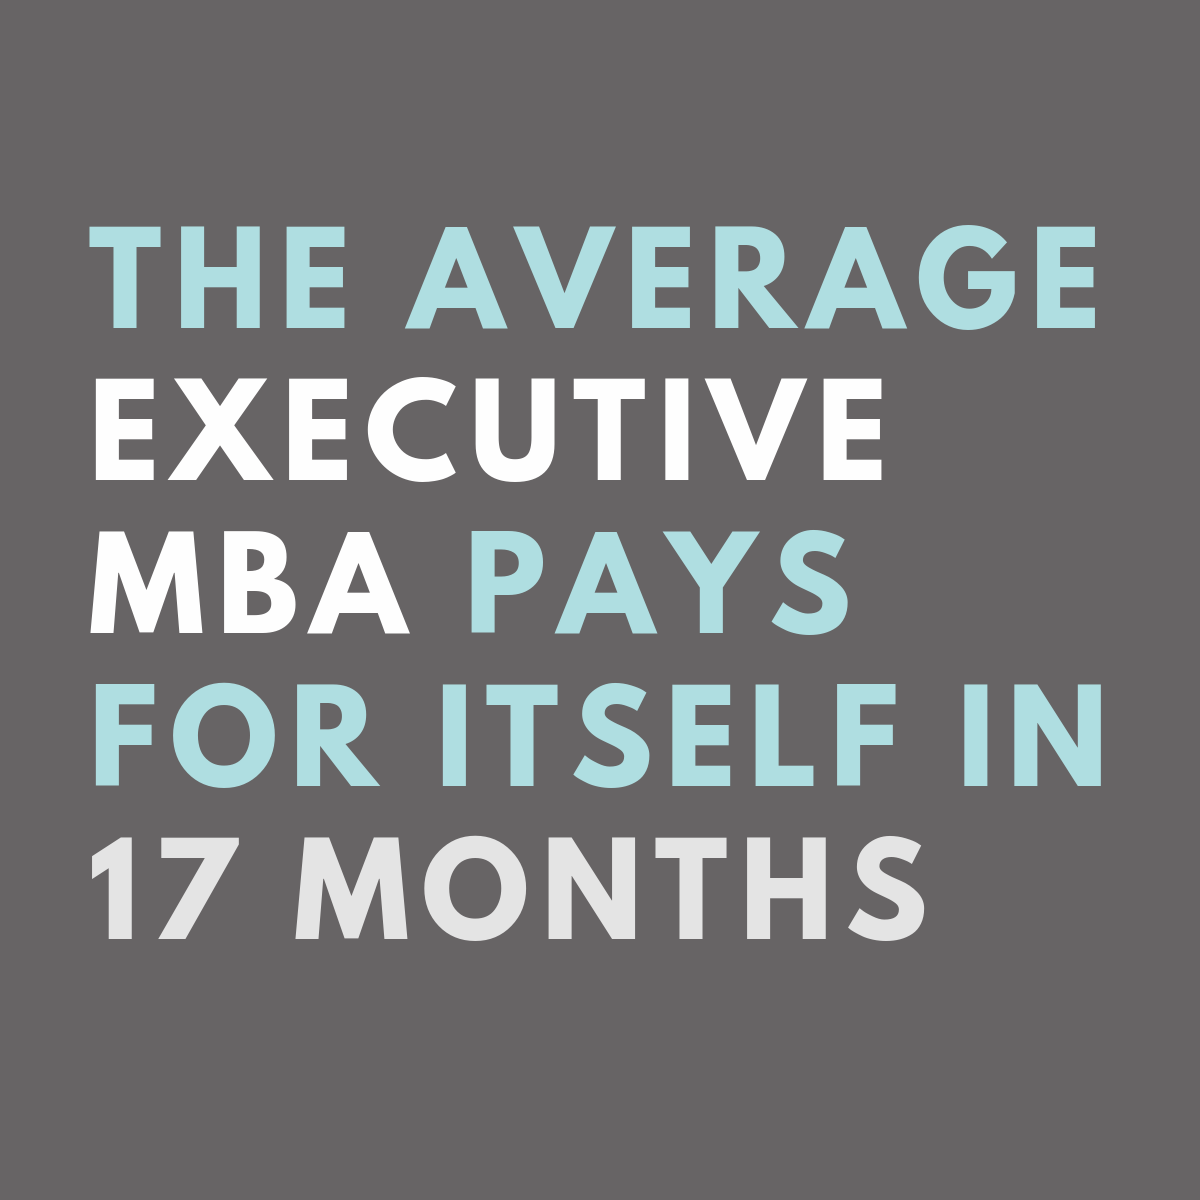 The average executive MBA pays for itself in 17 months